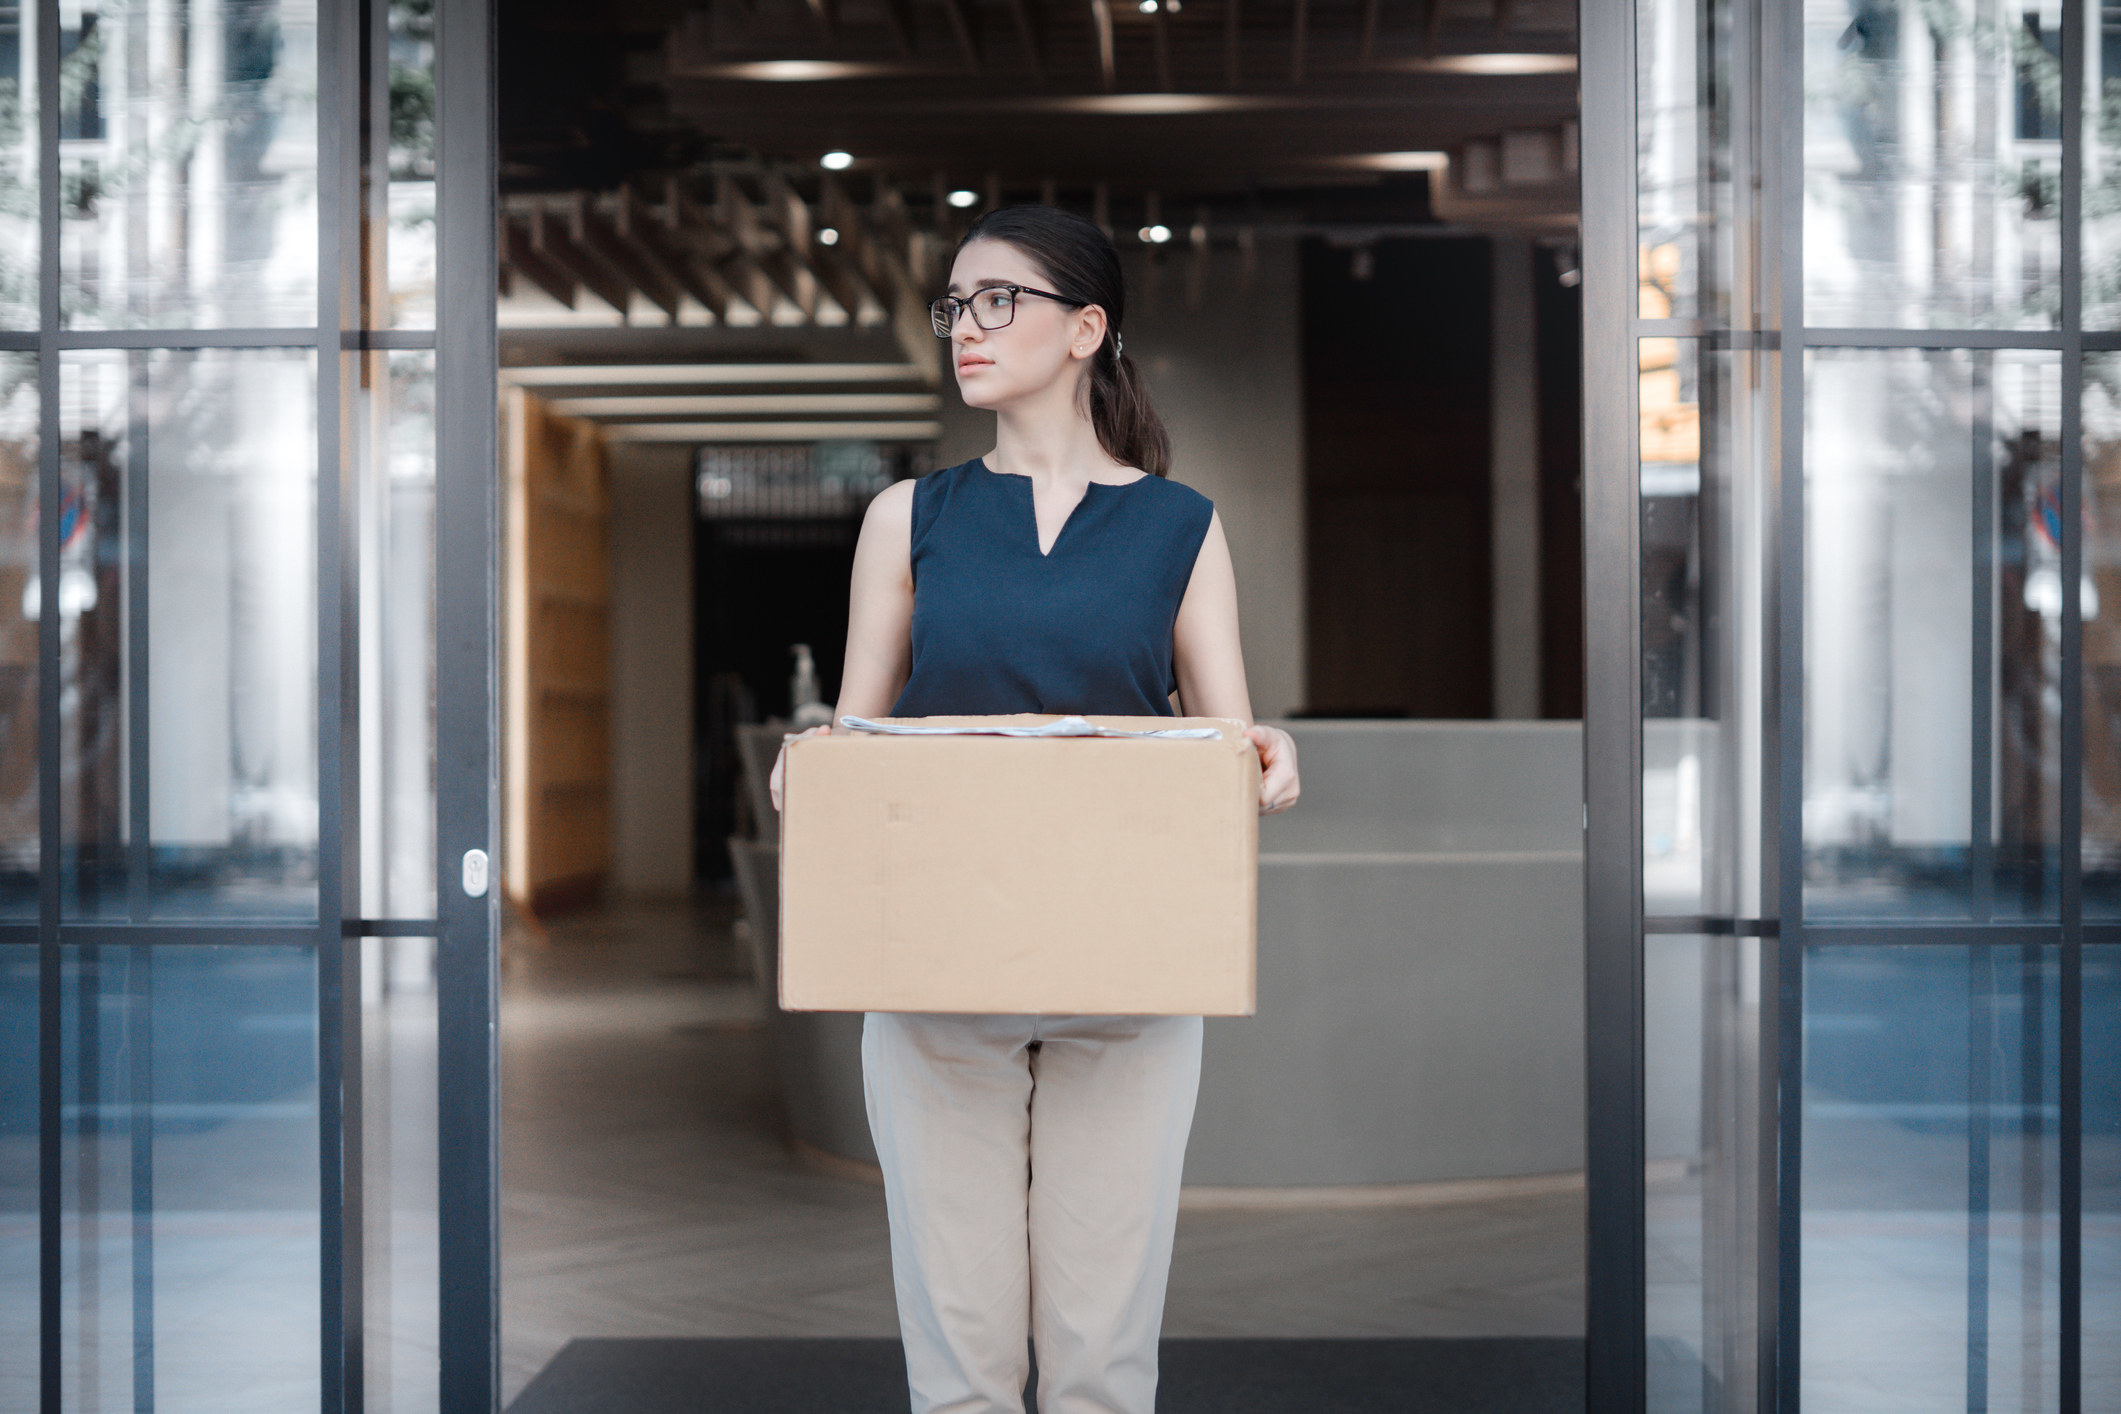 A woman walking out of a building holding a cardboard box